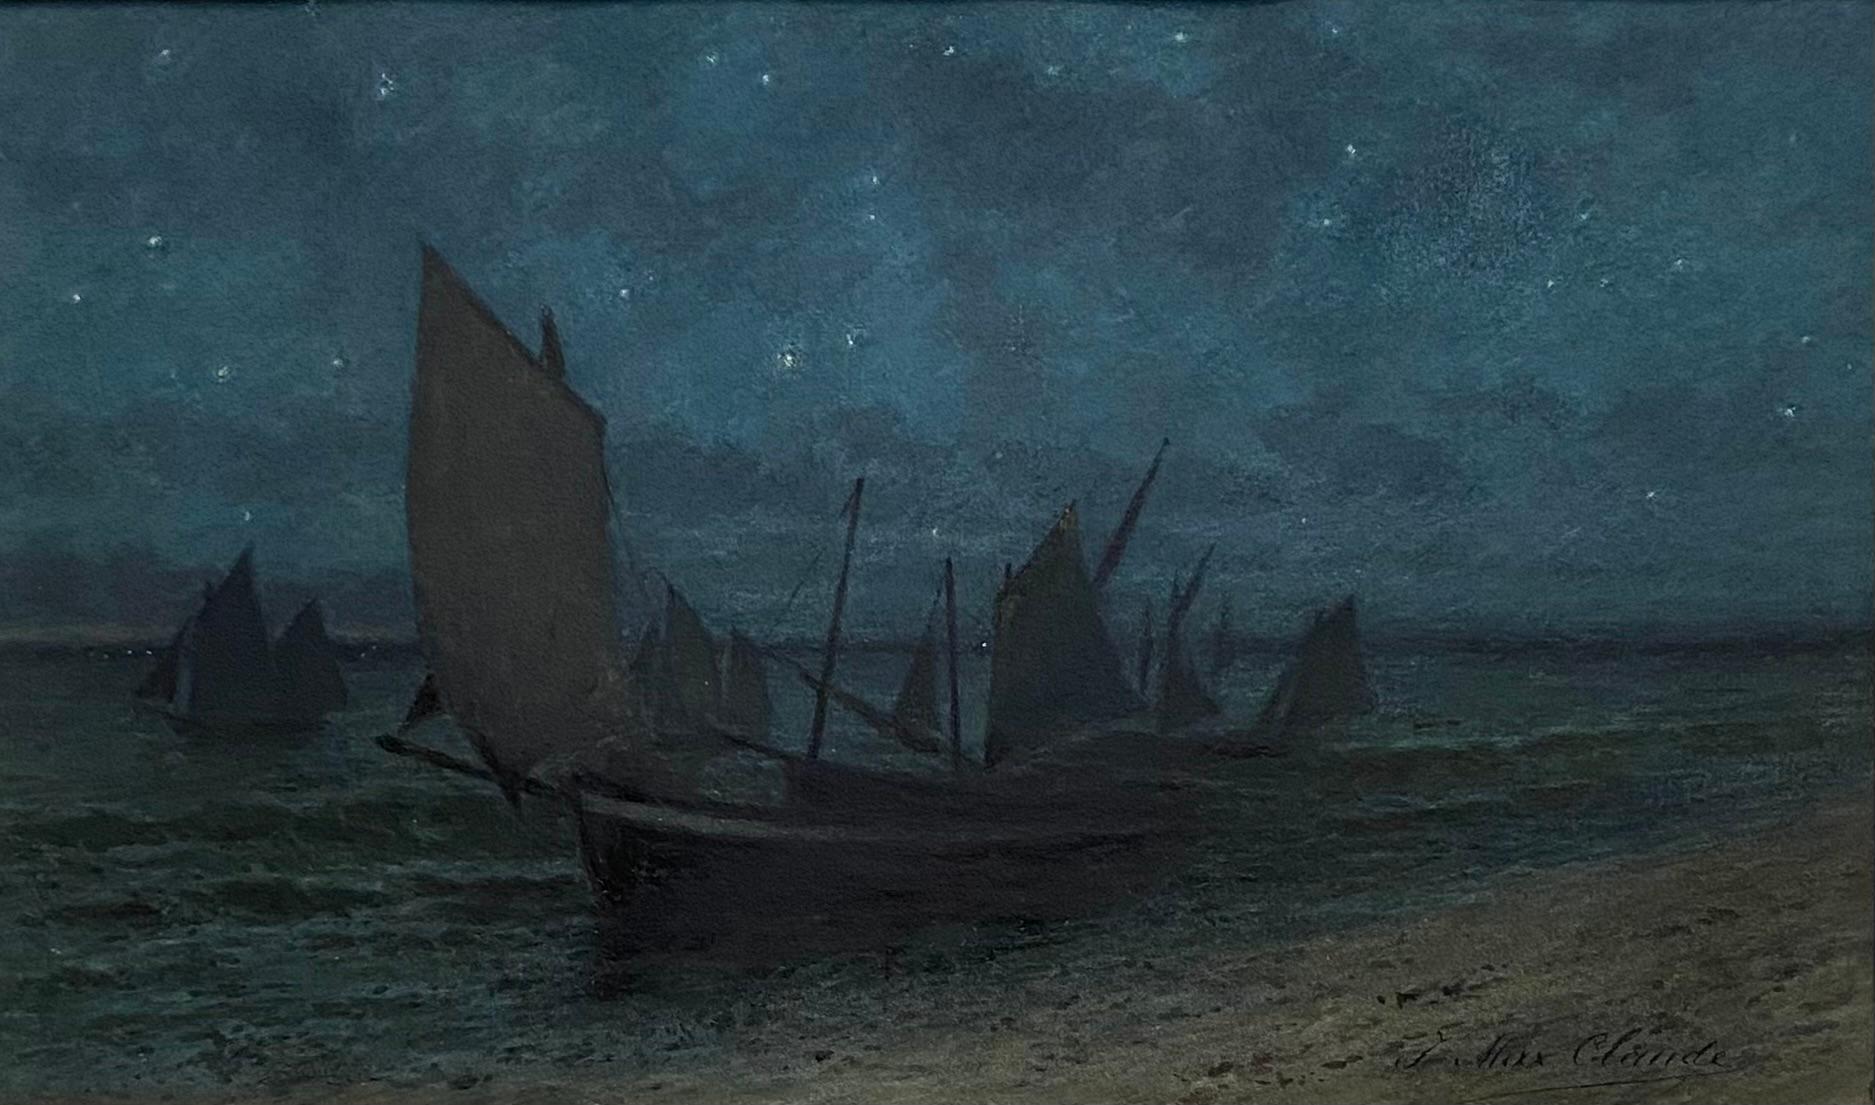 Night effect, return of the fishing boats (Marine) - Art by Jean Maxime Claude